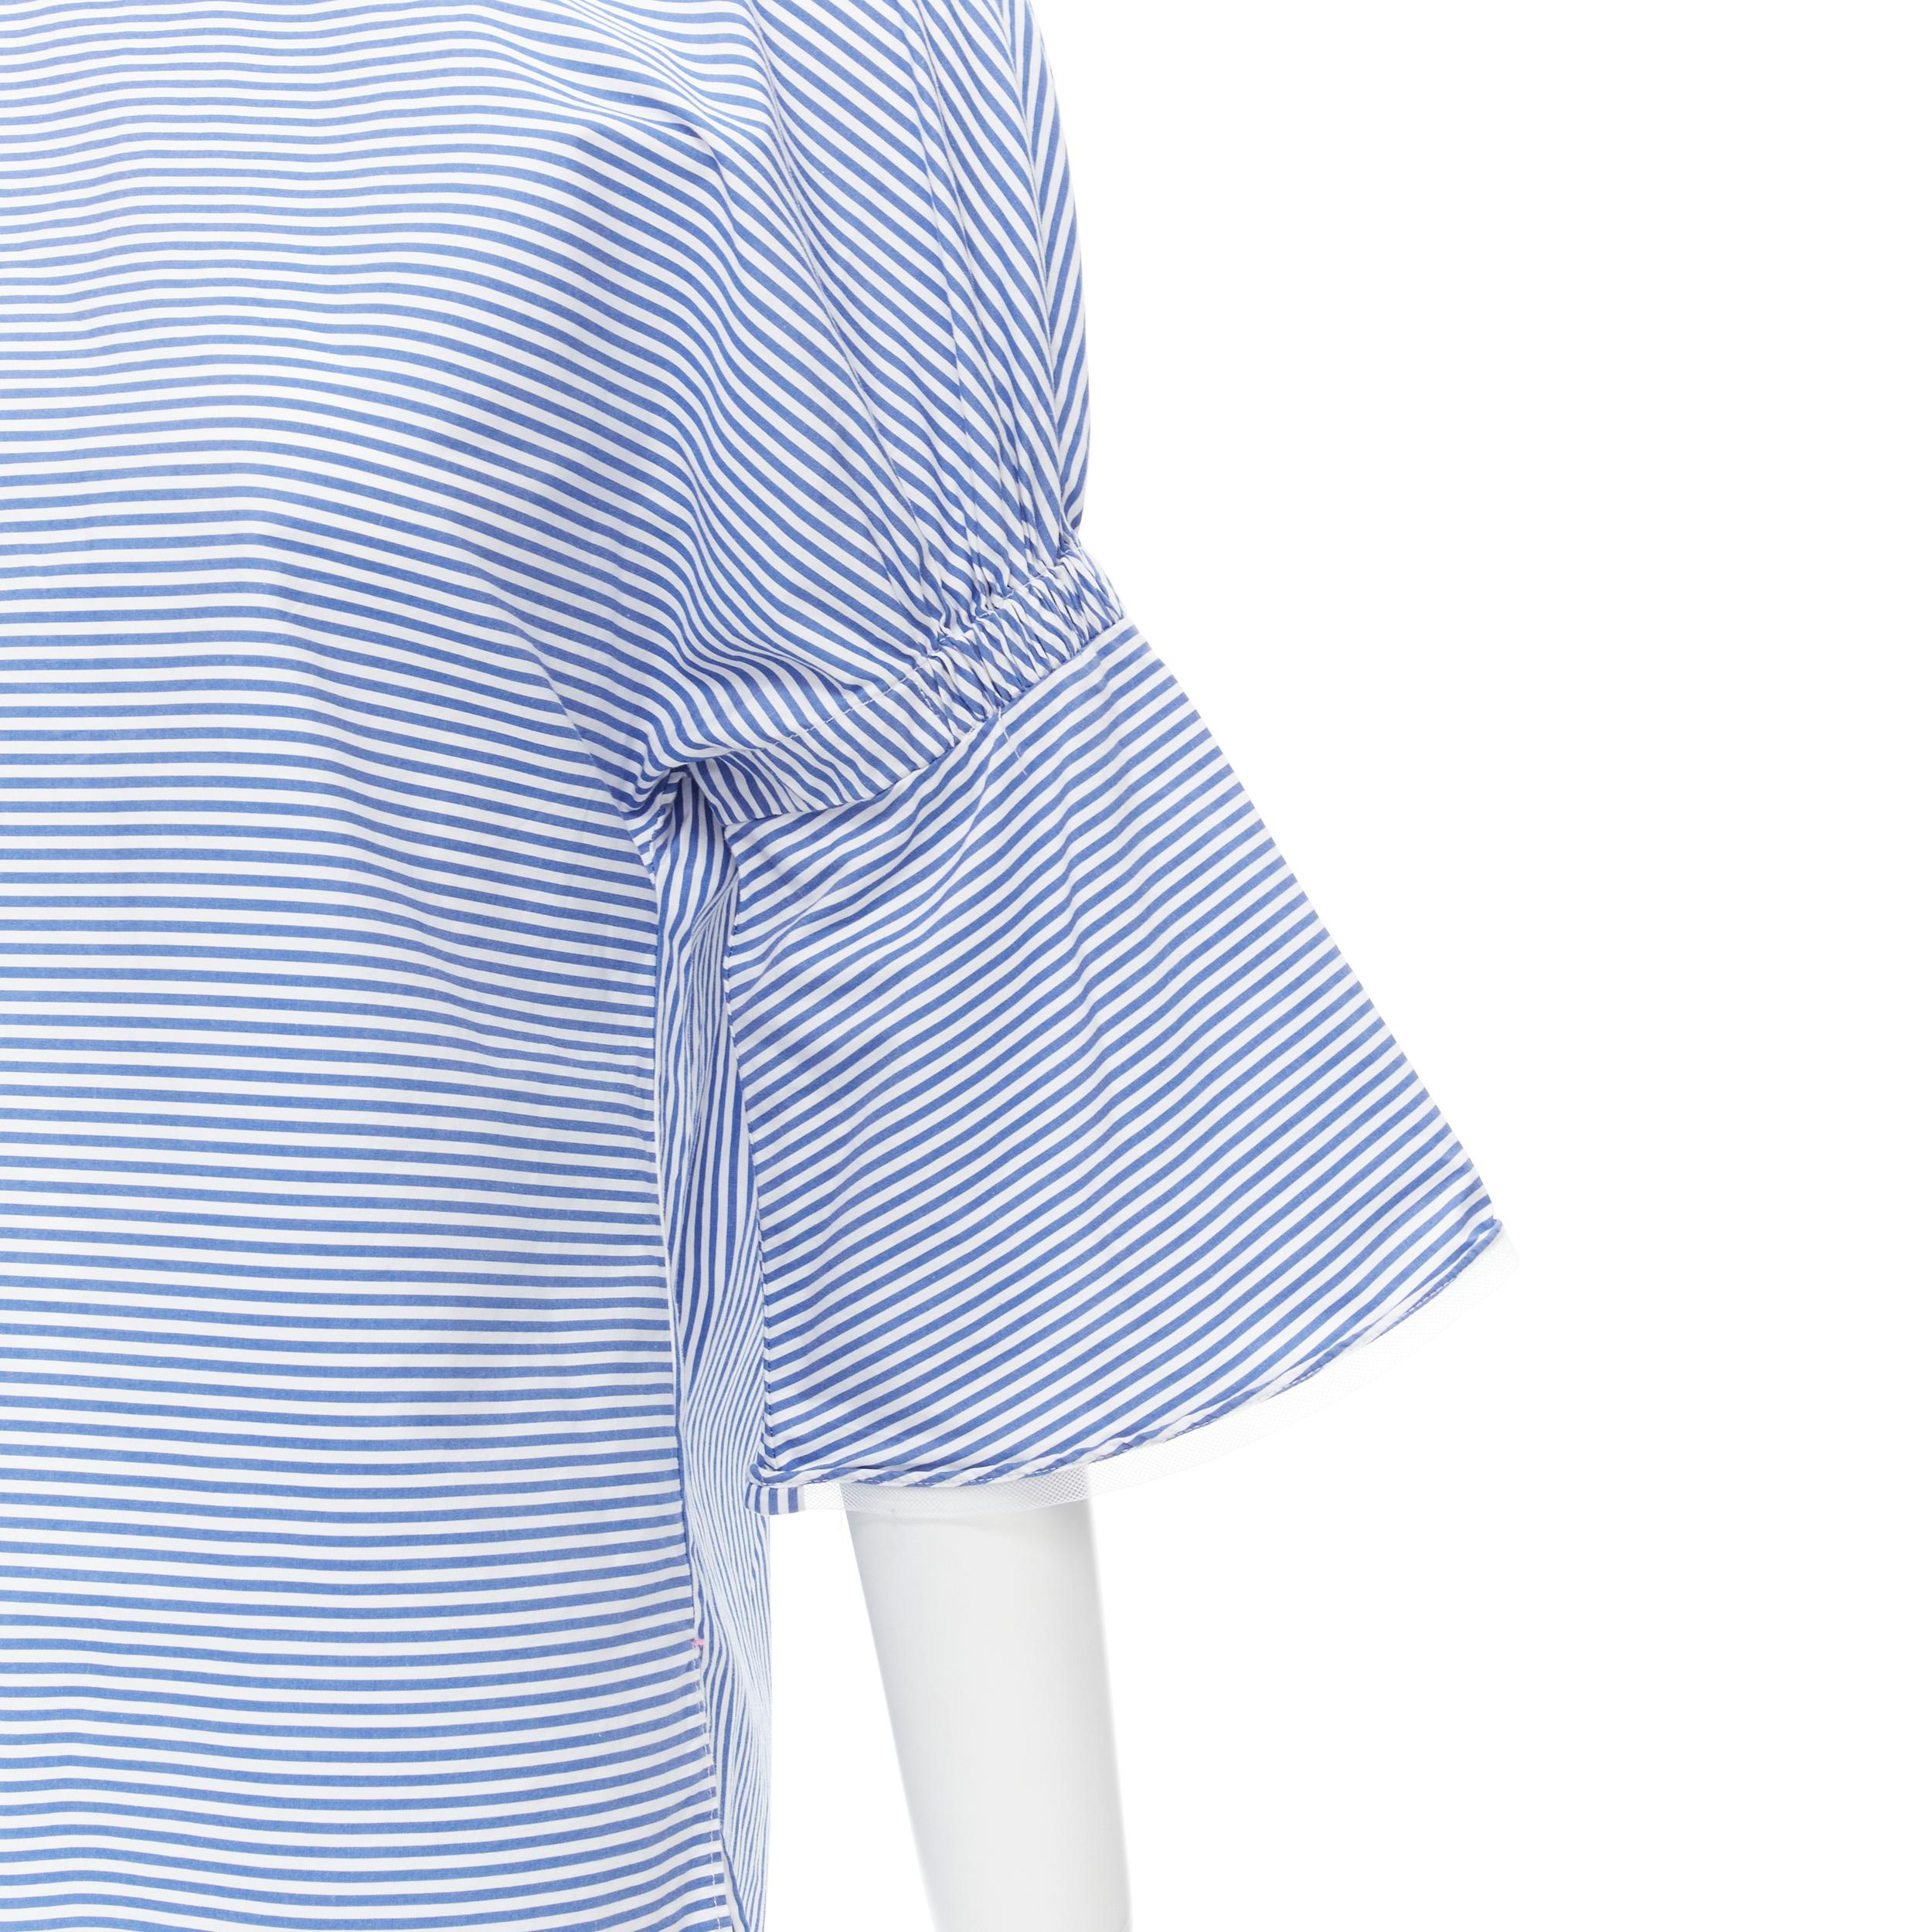 TIBI blue white striped cotton bell sleeves flared back top XS 
Reference: CECU/A00011 
Brand: Tibi 
Material: Cotton 
Color: Blue 
Pattern: Striped 
Closure: Zip 
Extra Detail: White mesh trimmed along sleeves. 
Made in: China 

CONDITION: